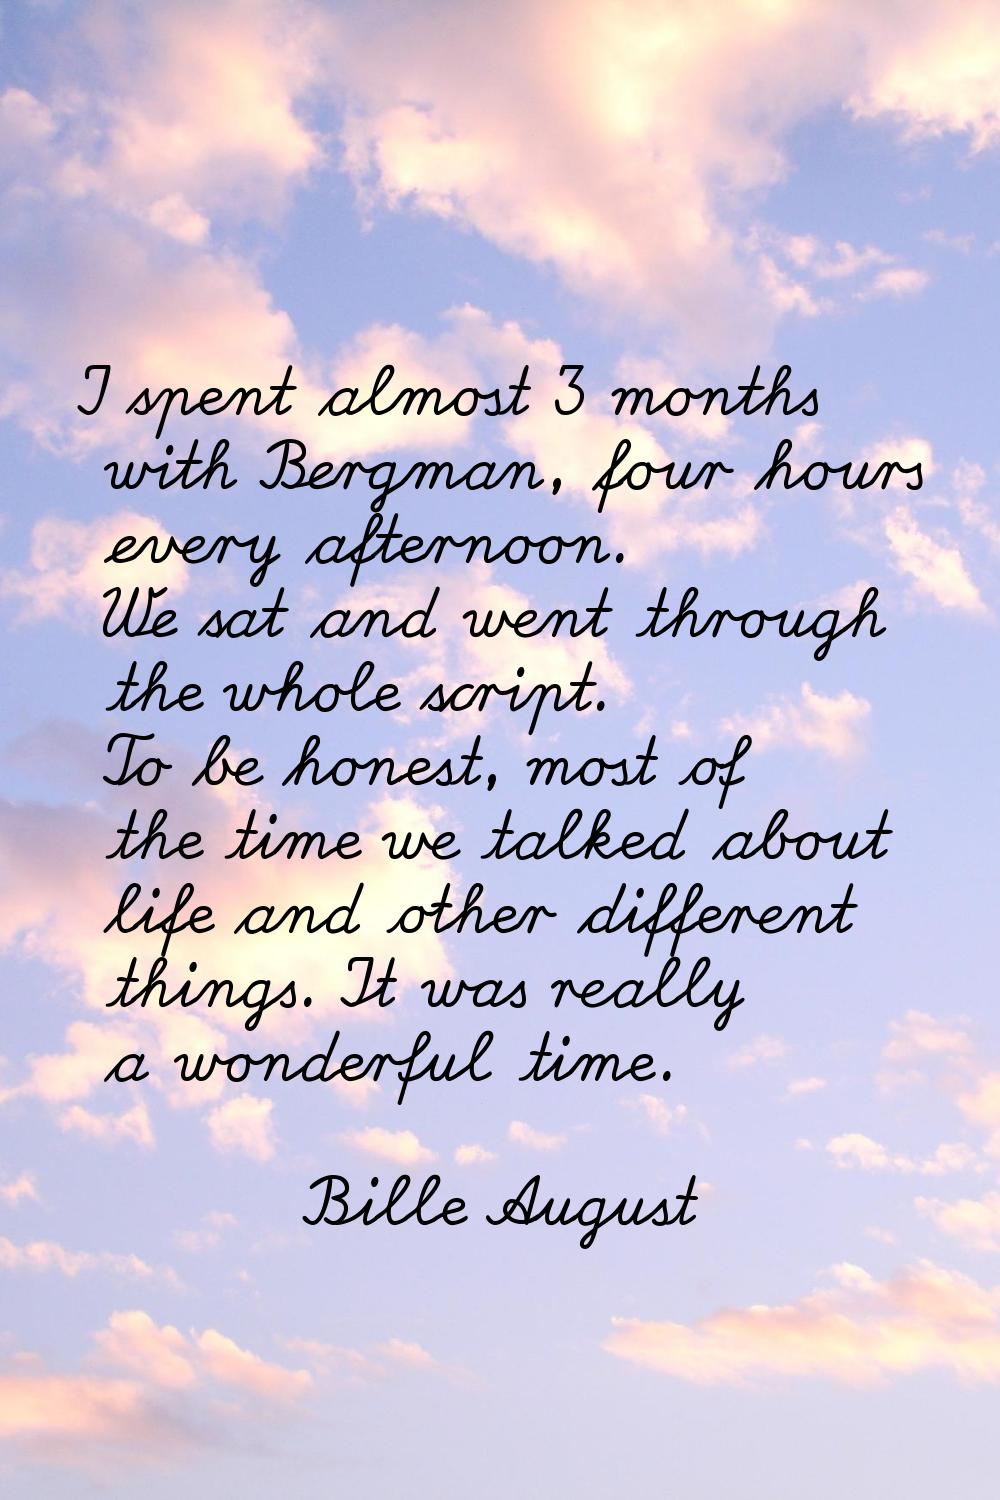 I spent almost 3 months with Bergman, four hours every afternoon. We sat and went through the whole